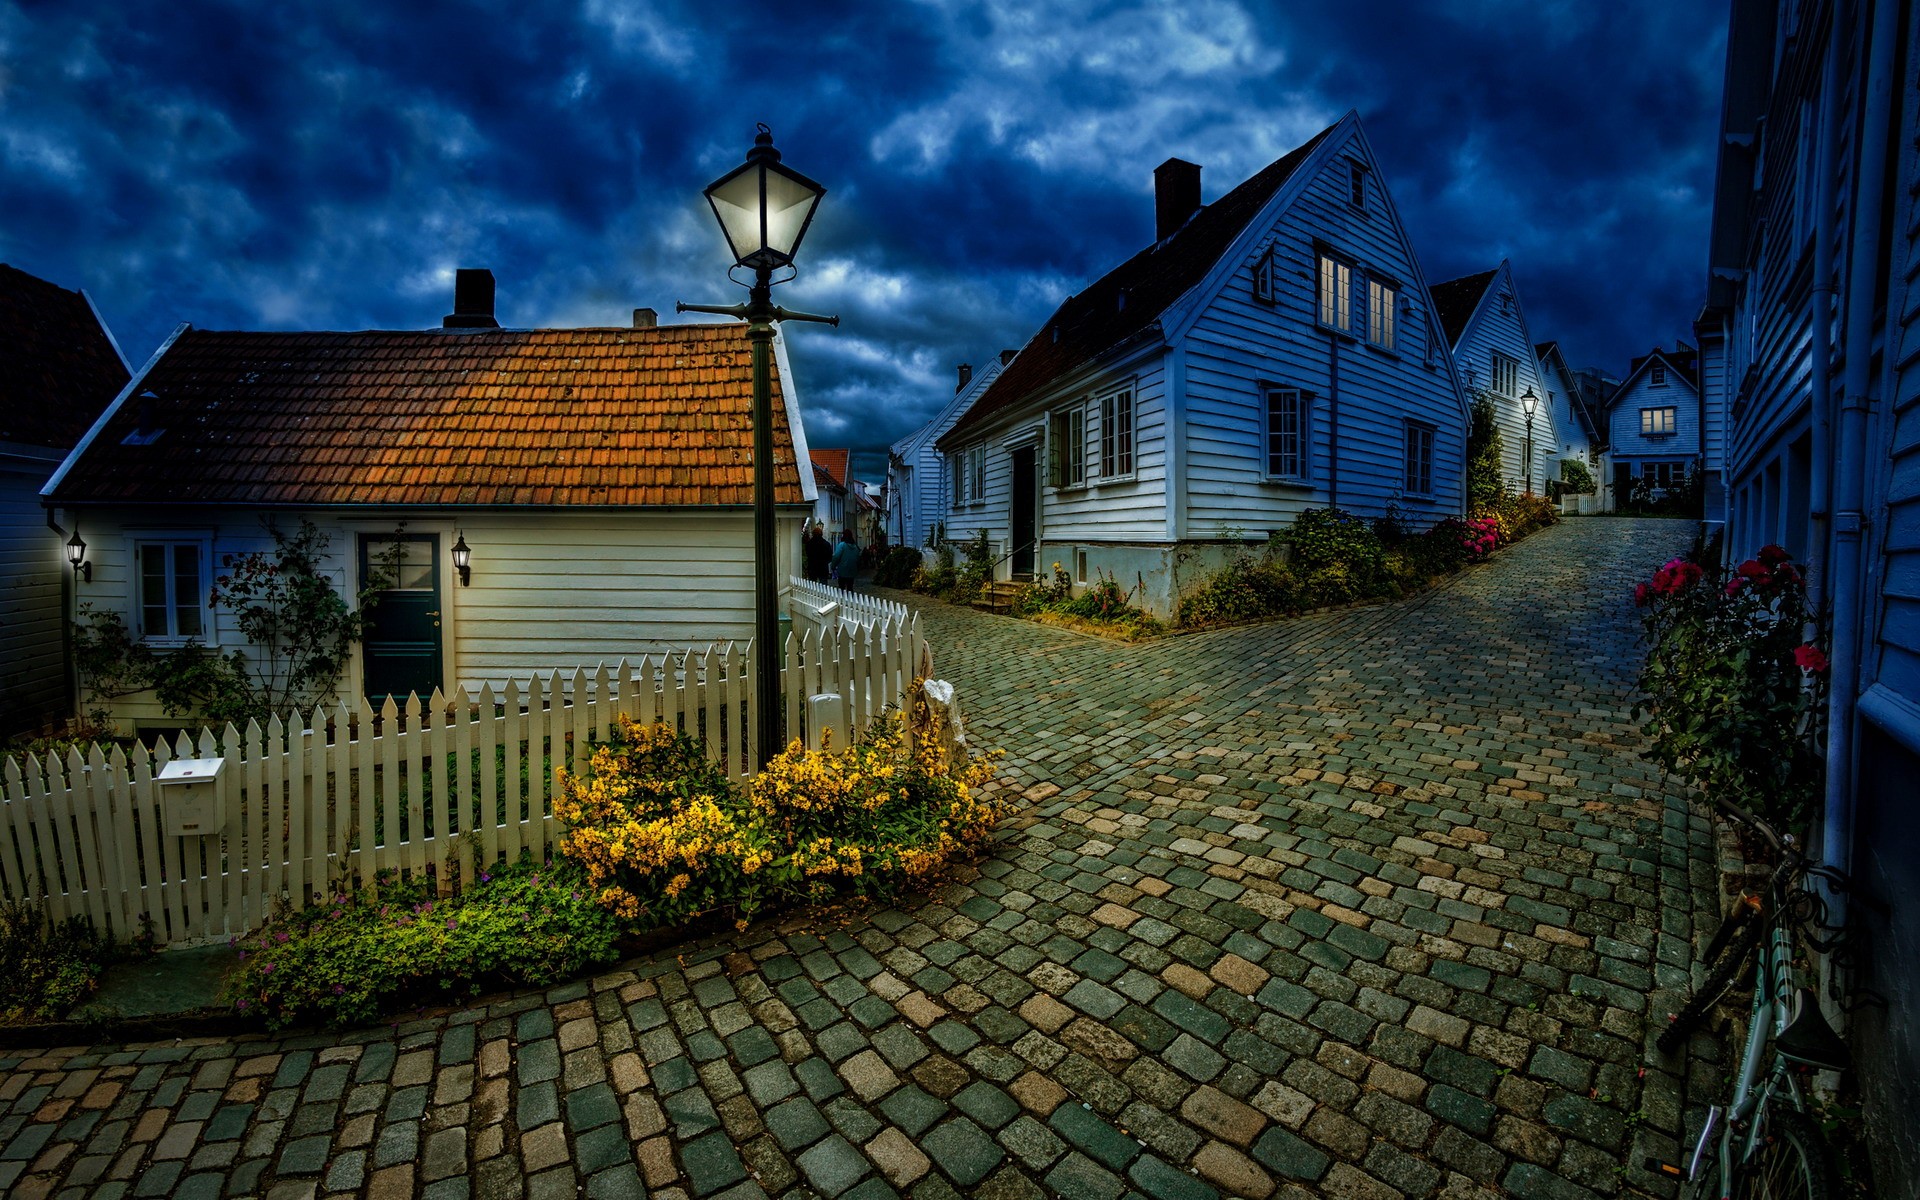 General 1920x1200 architecture building nature Norway house night street village street light hills clouds fence calm idyllic